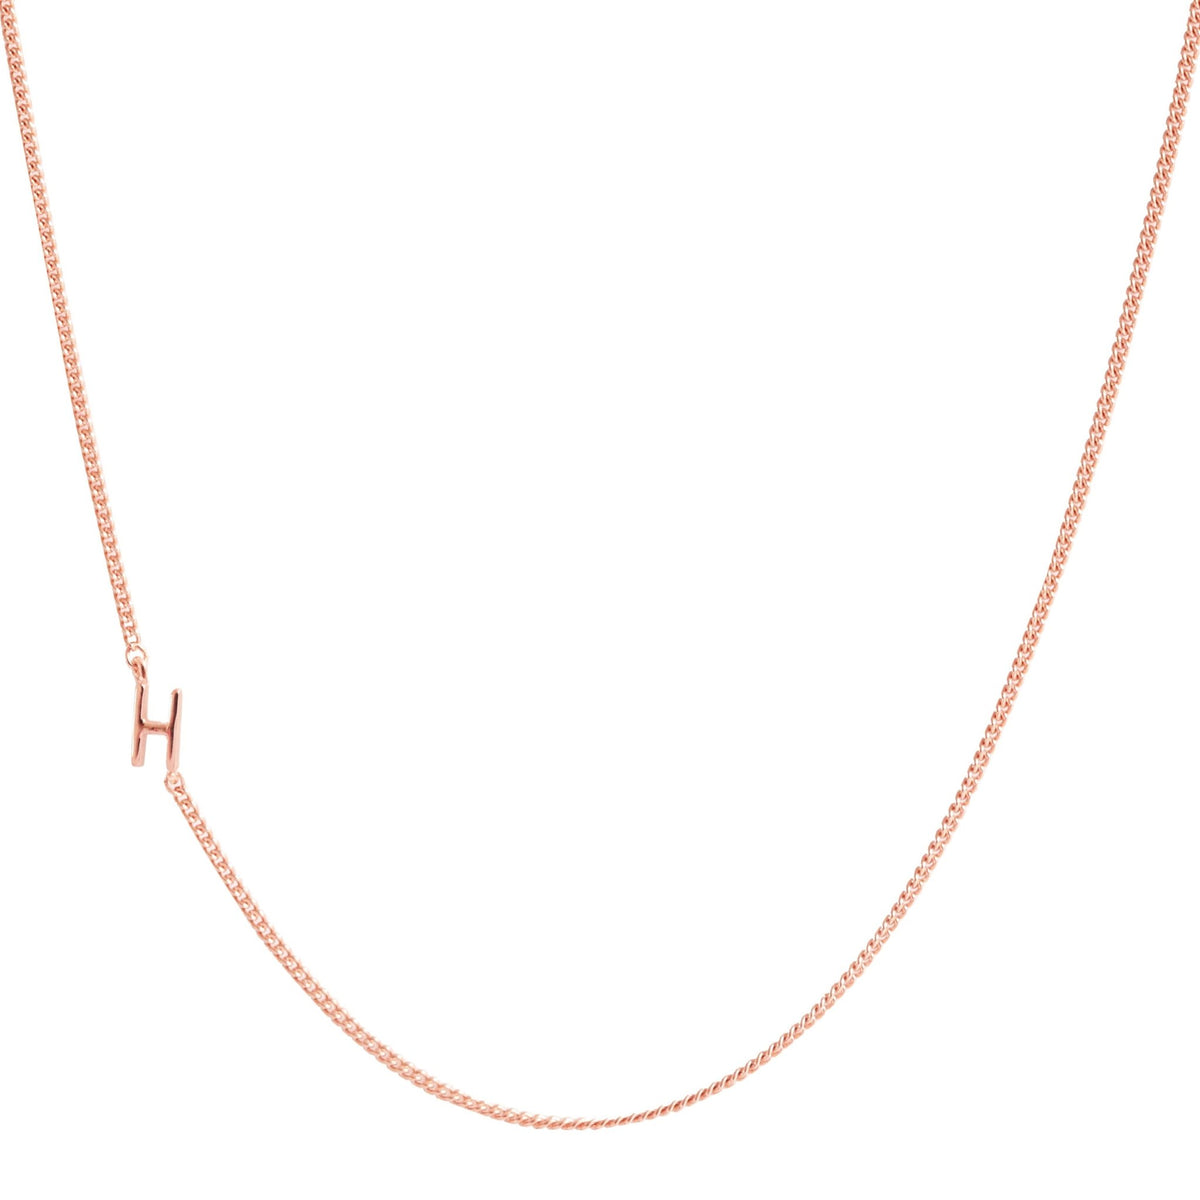 NOTABLE OFFSET INITIAL NECKLACE - H - GOLD, ROSE GOLD, OR SILVER - SO PRETTY CARA COTTER